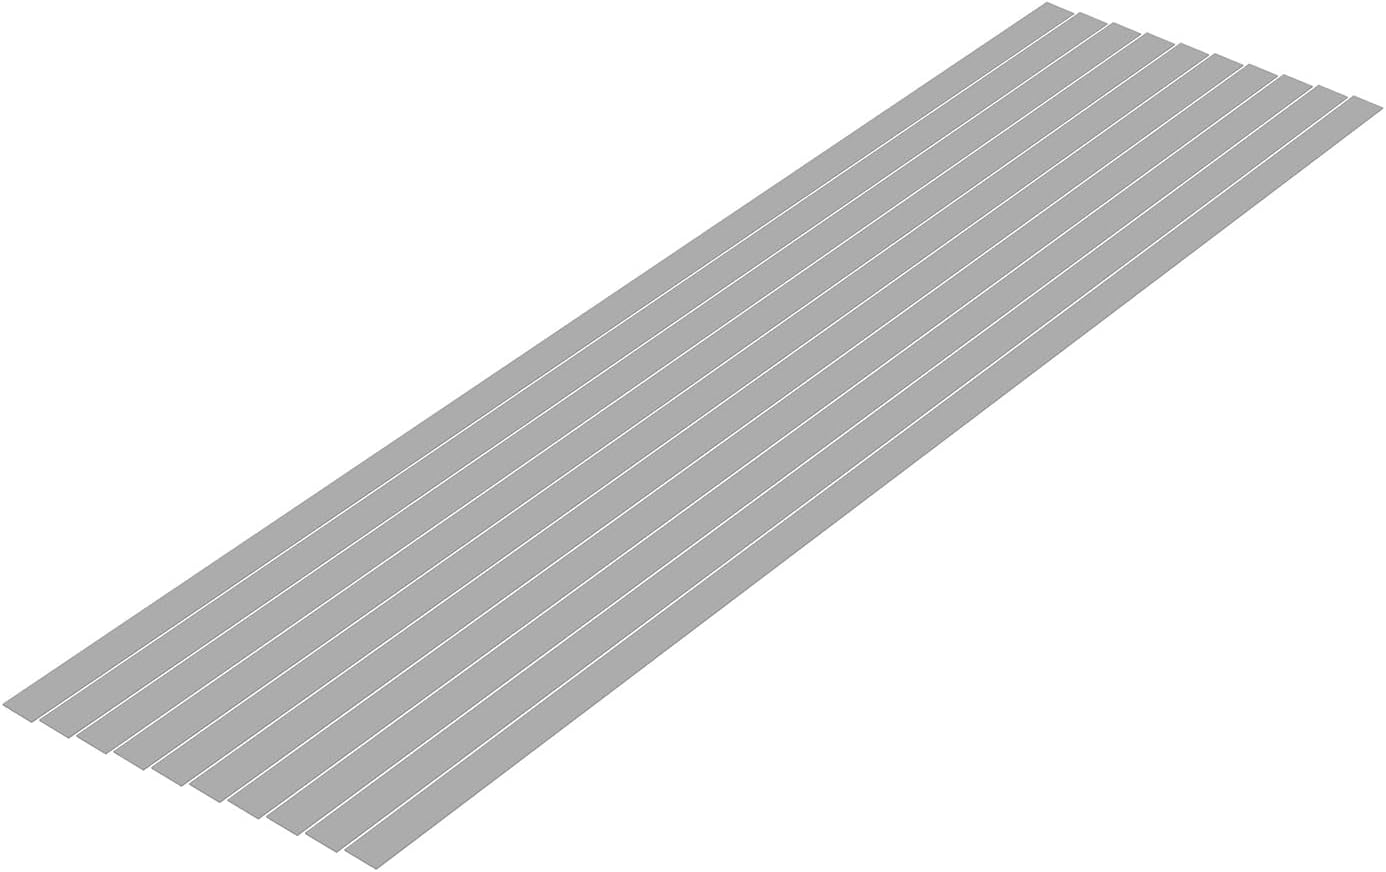 Wave Material Series OM-467 Plastic Material Gray Shredded Board 0.01 x 0.28 inches (0.3 x 7.0 mm), Pack of 10 - BanzaiHobby